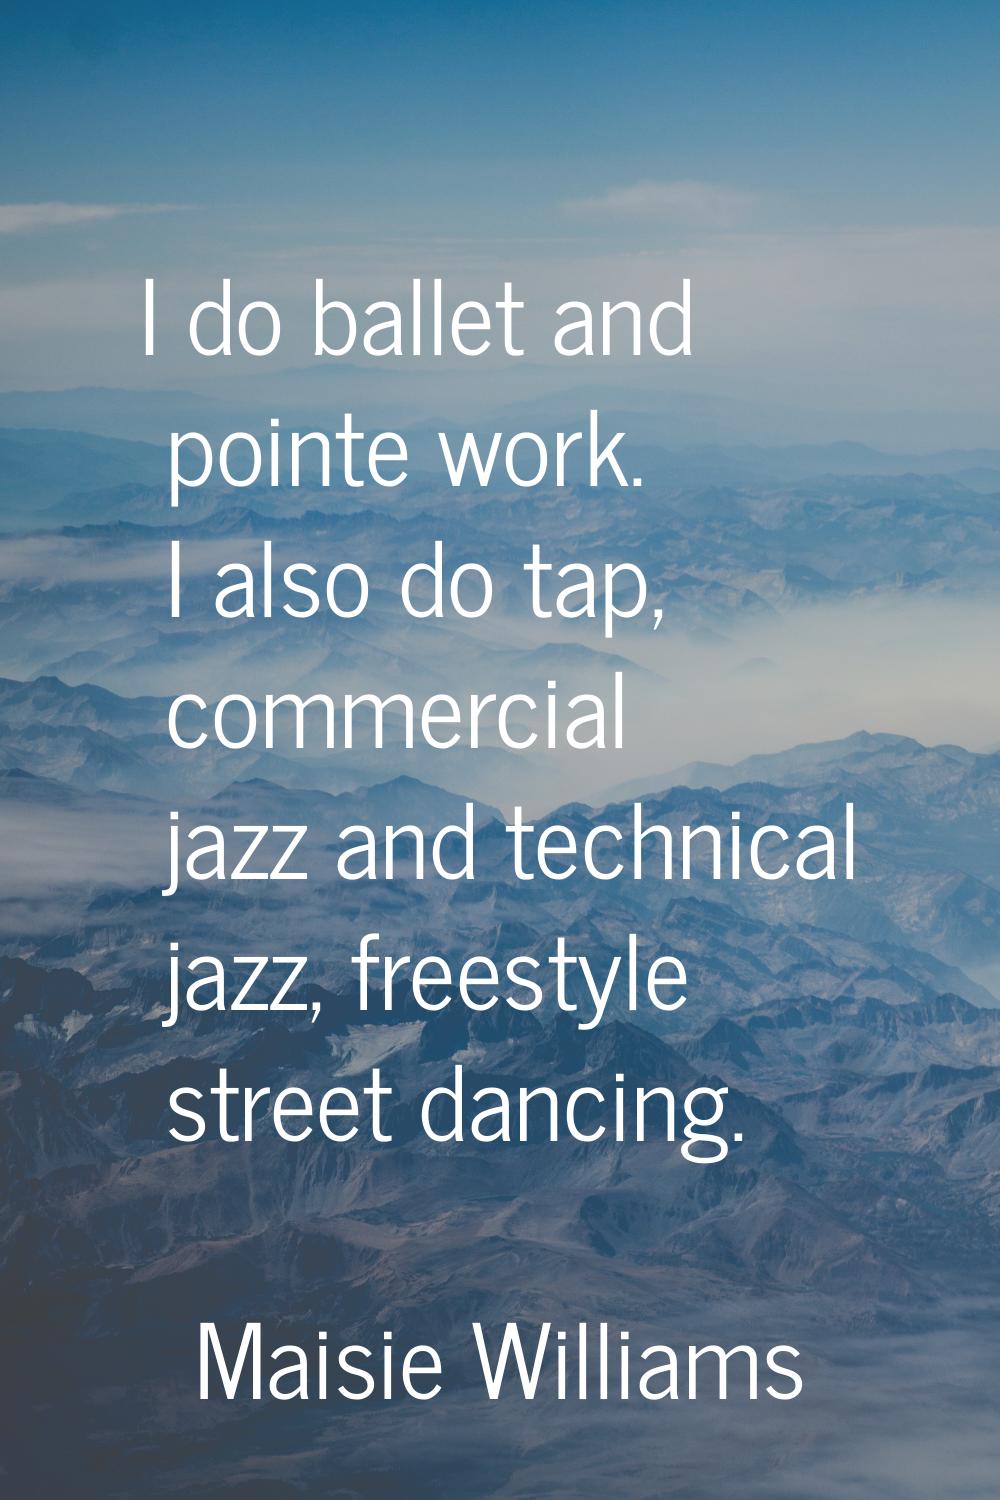 I do ballet and pointe work. I also do tap, commercial jazz and technical jazz, freestyle street da